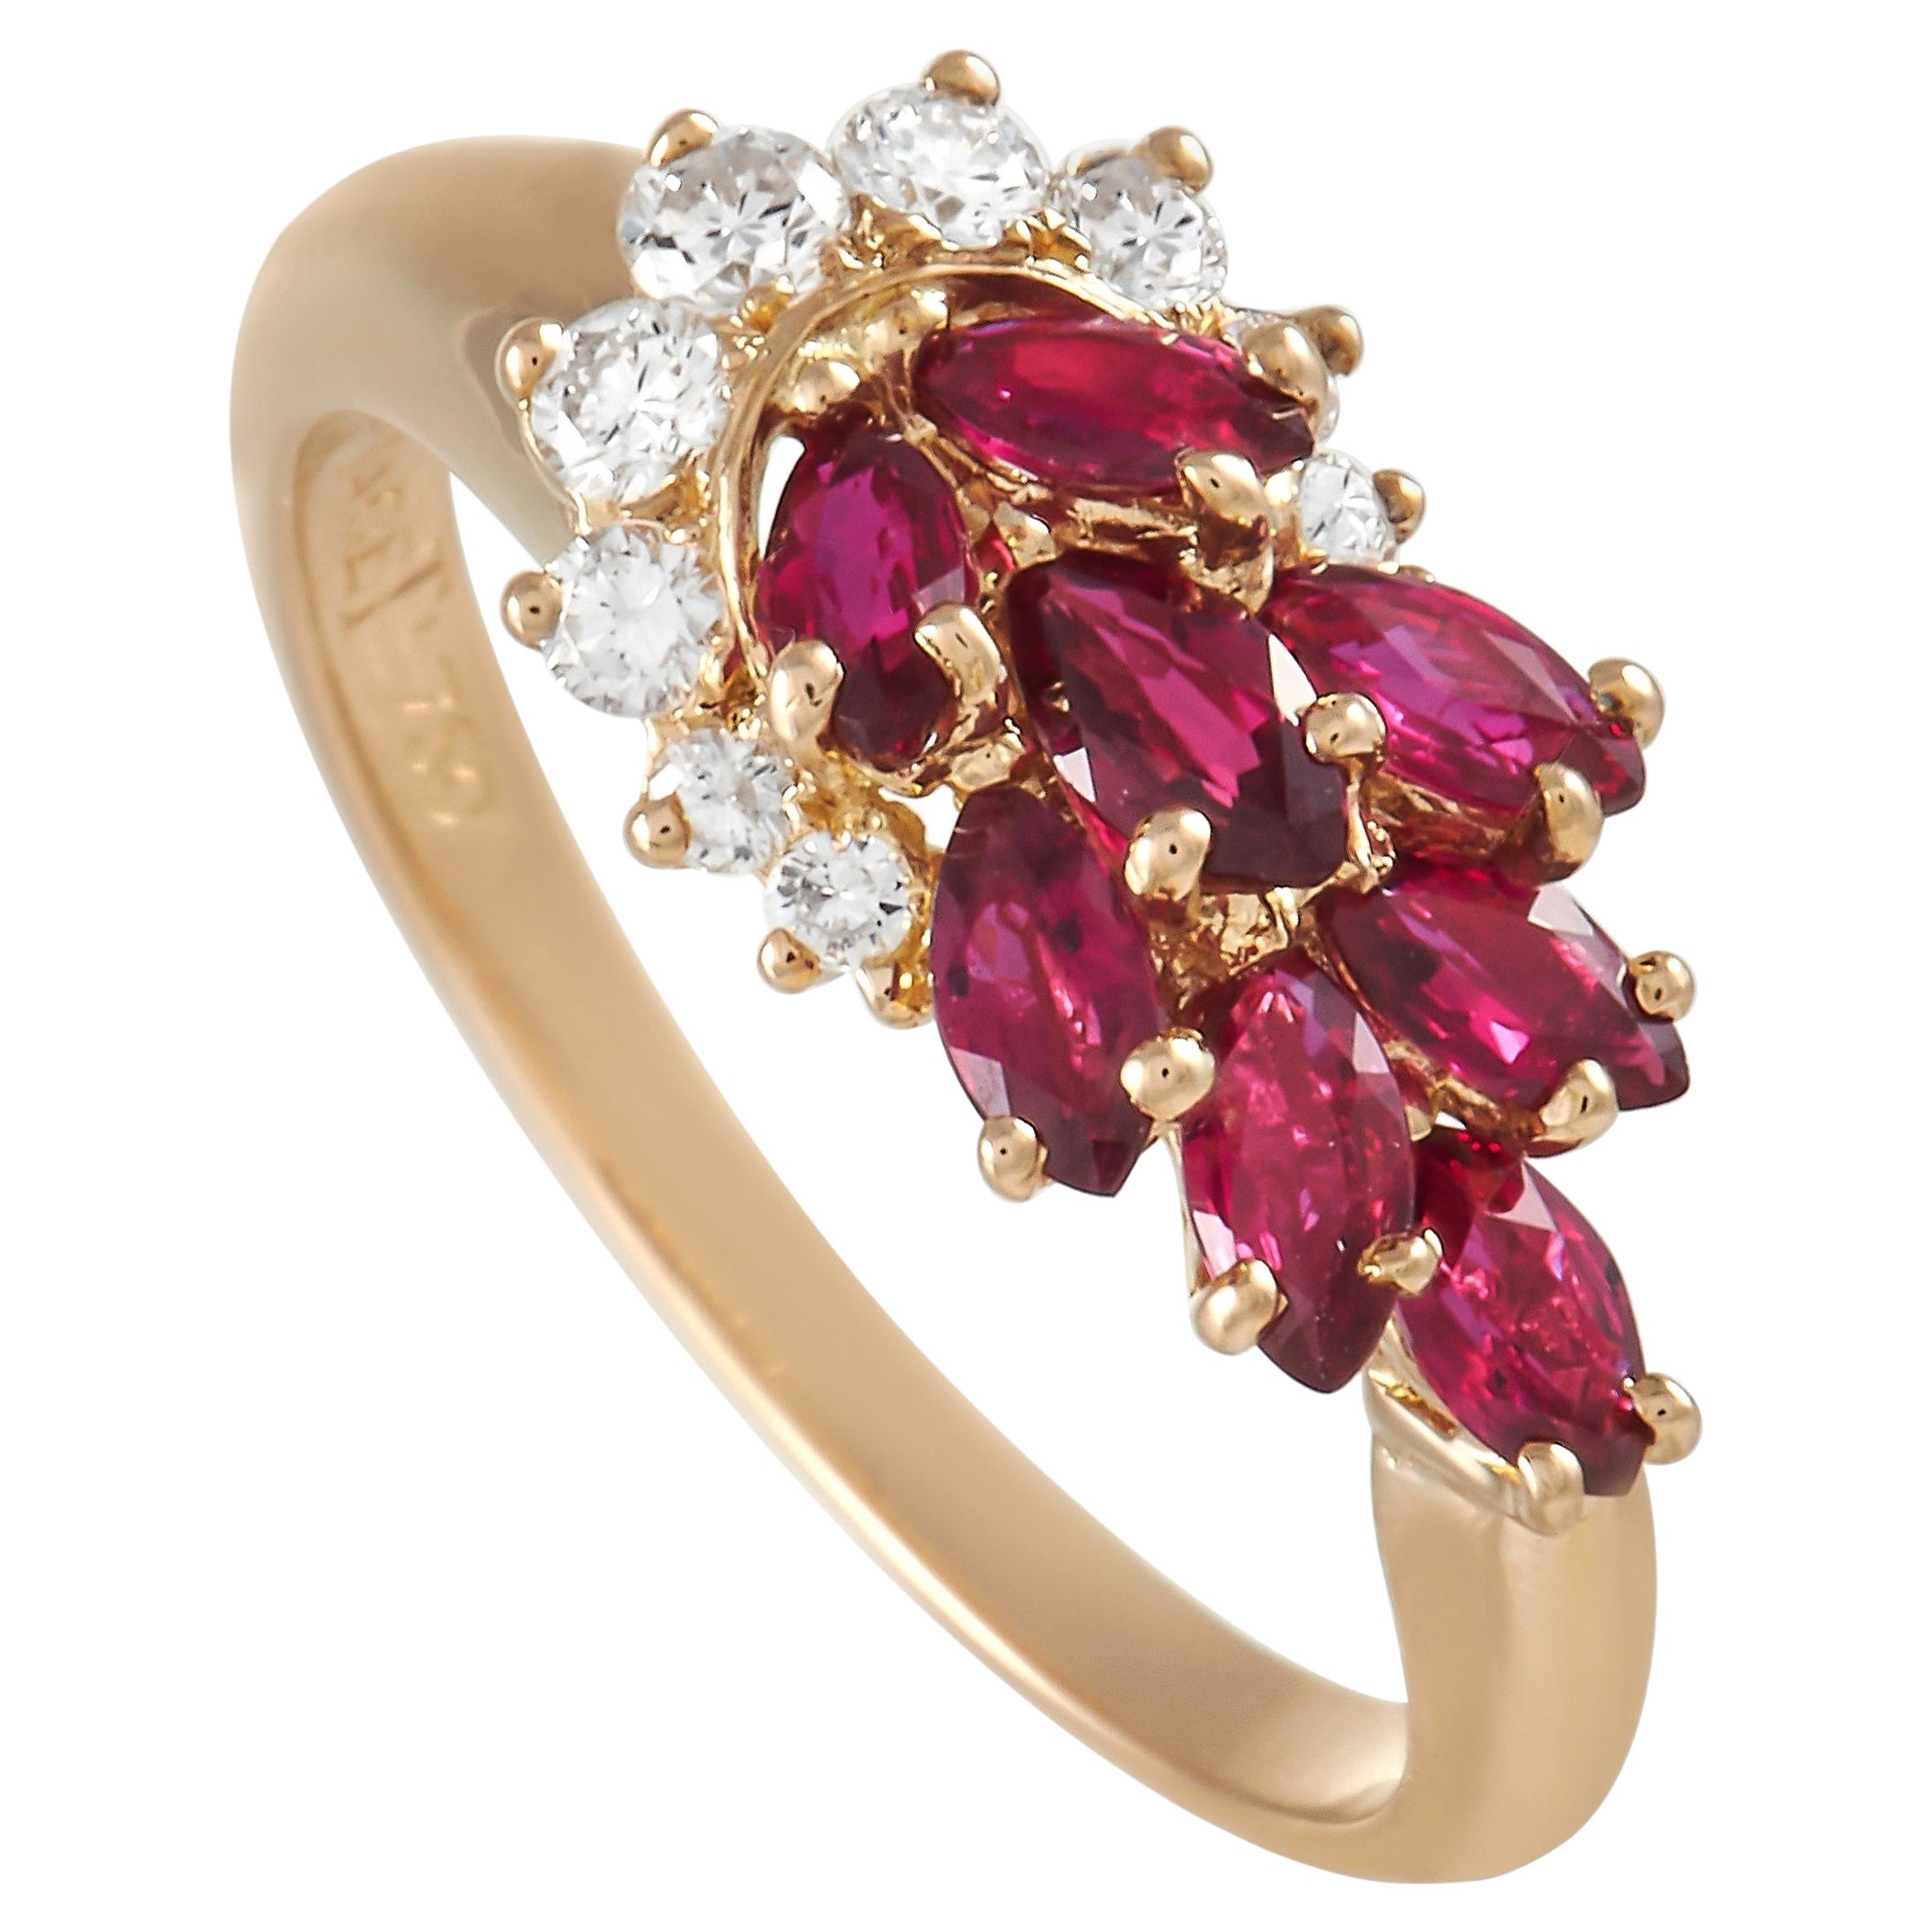 Piaget 18K Yellow Gold Diamond and Ruby Ring